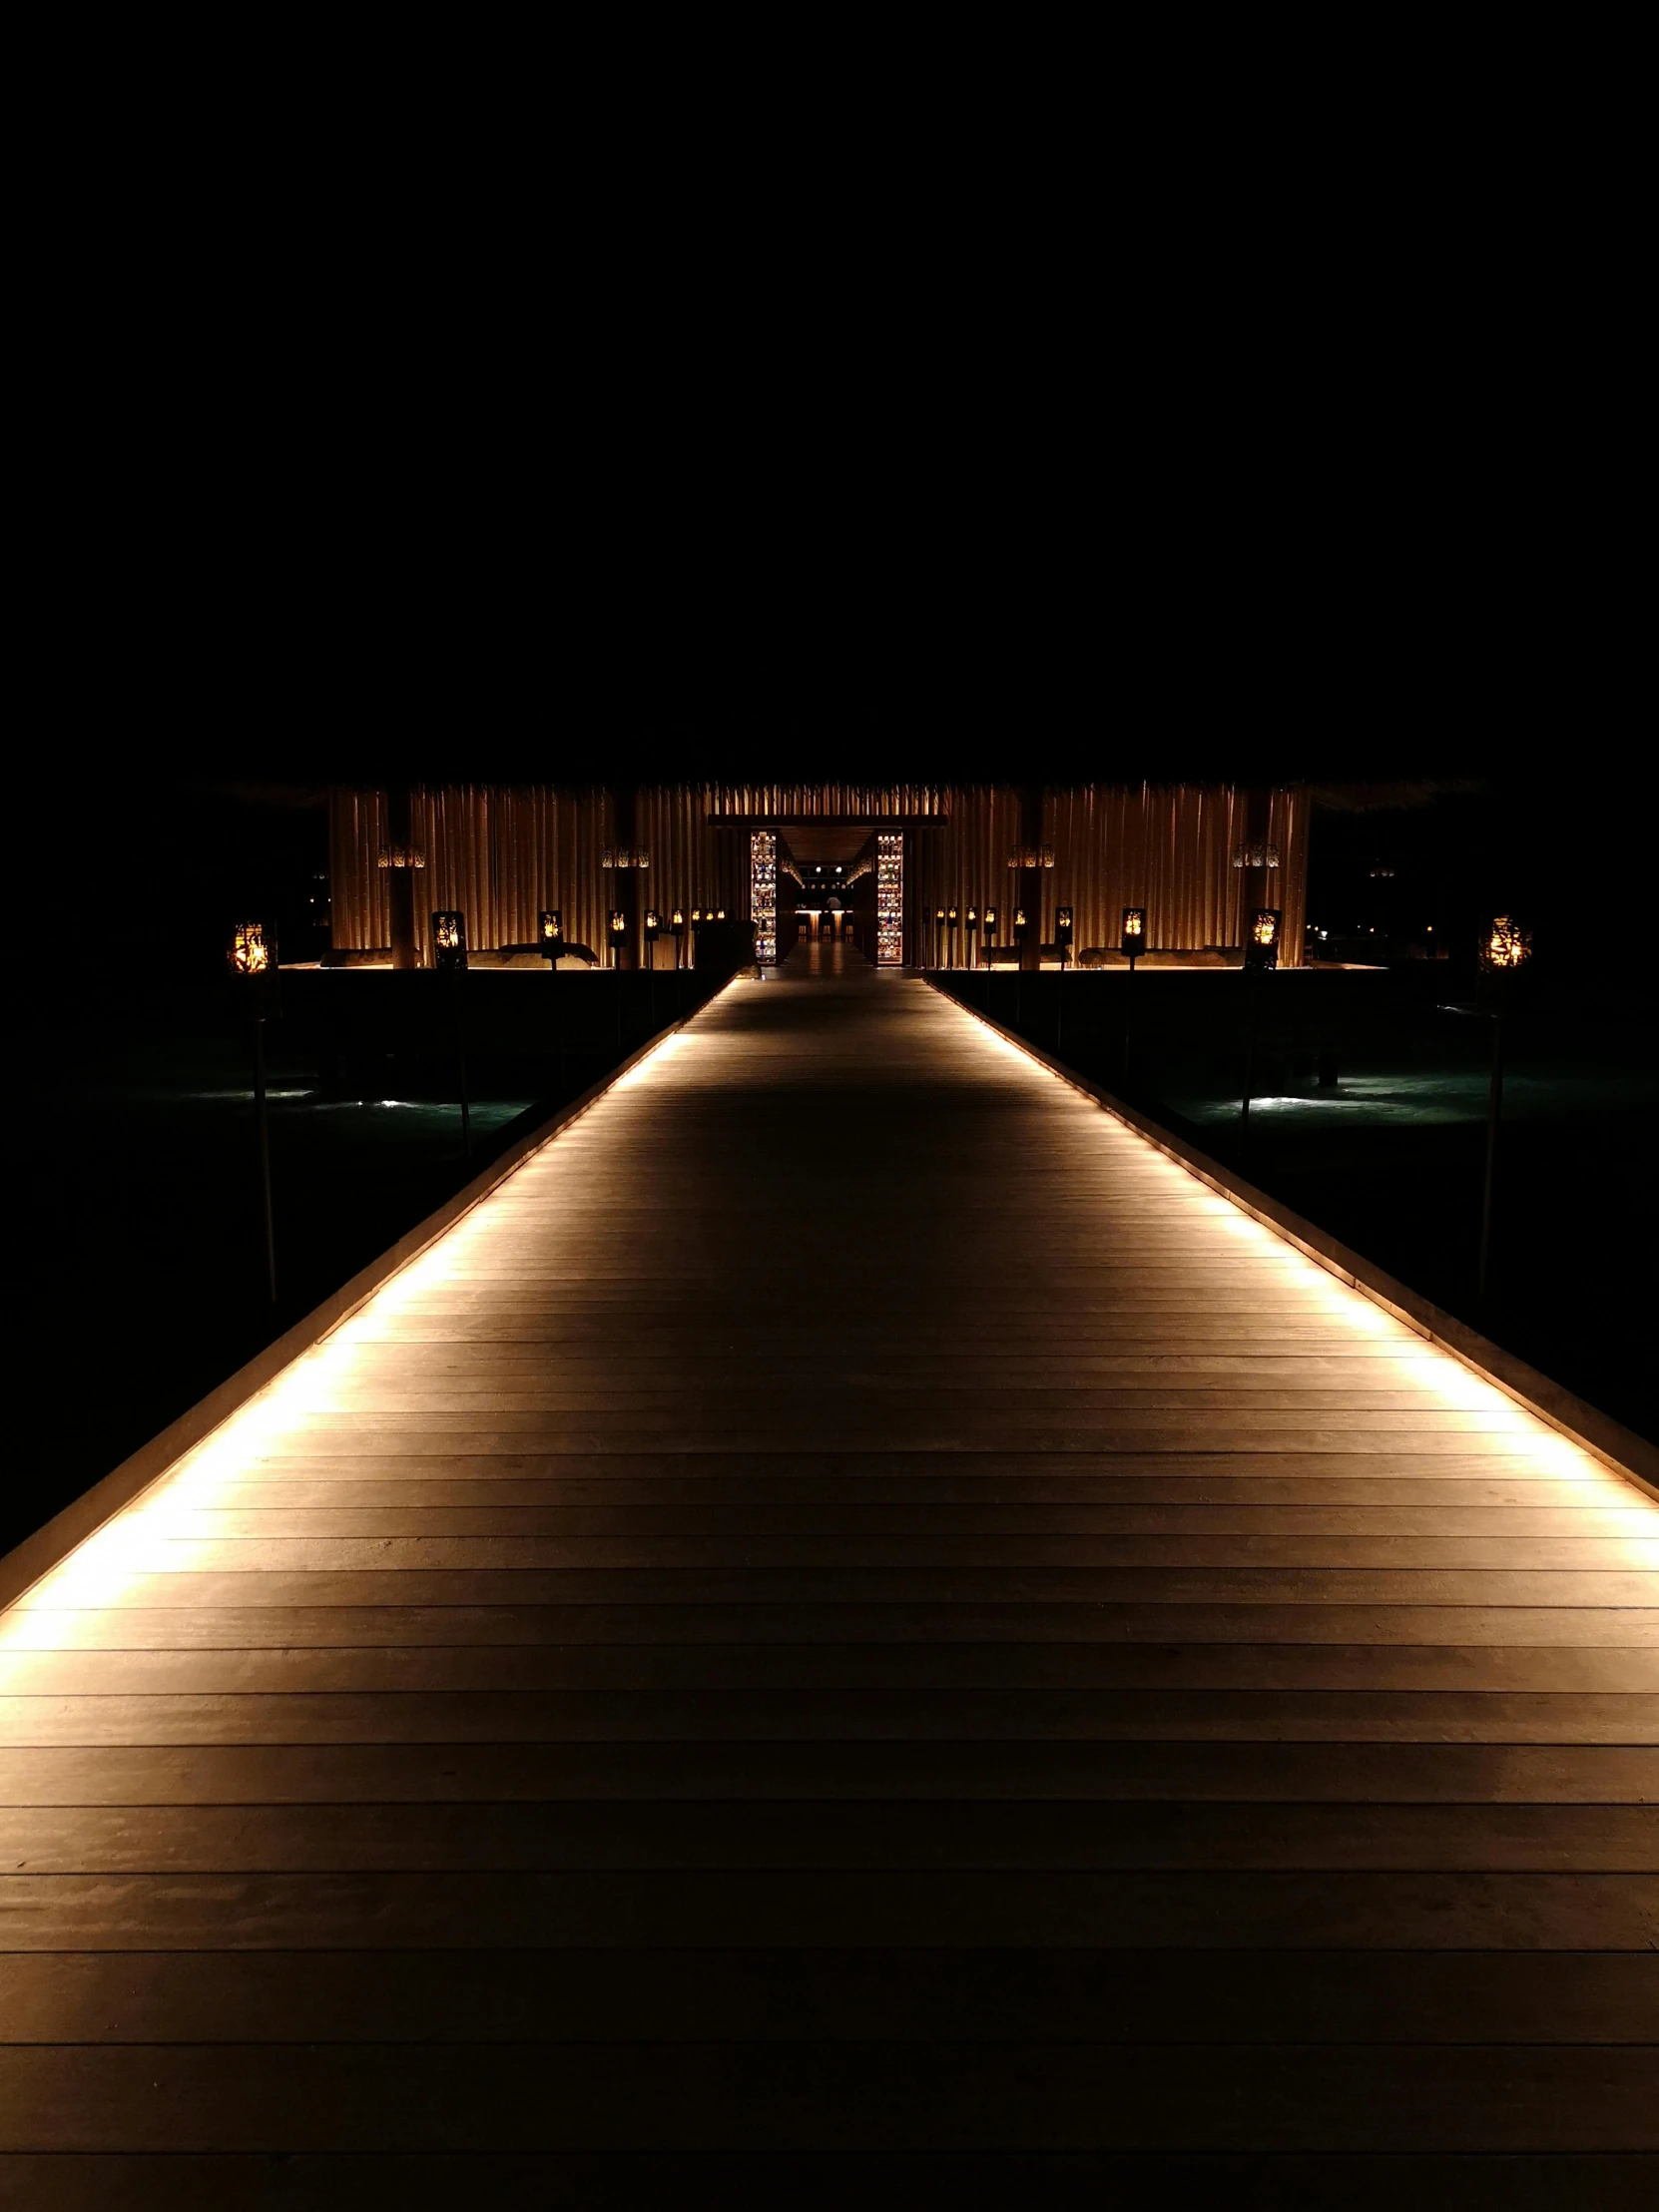 this is a walkway that is illuminated at night